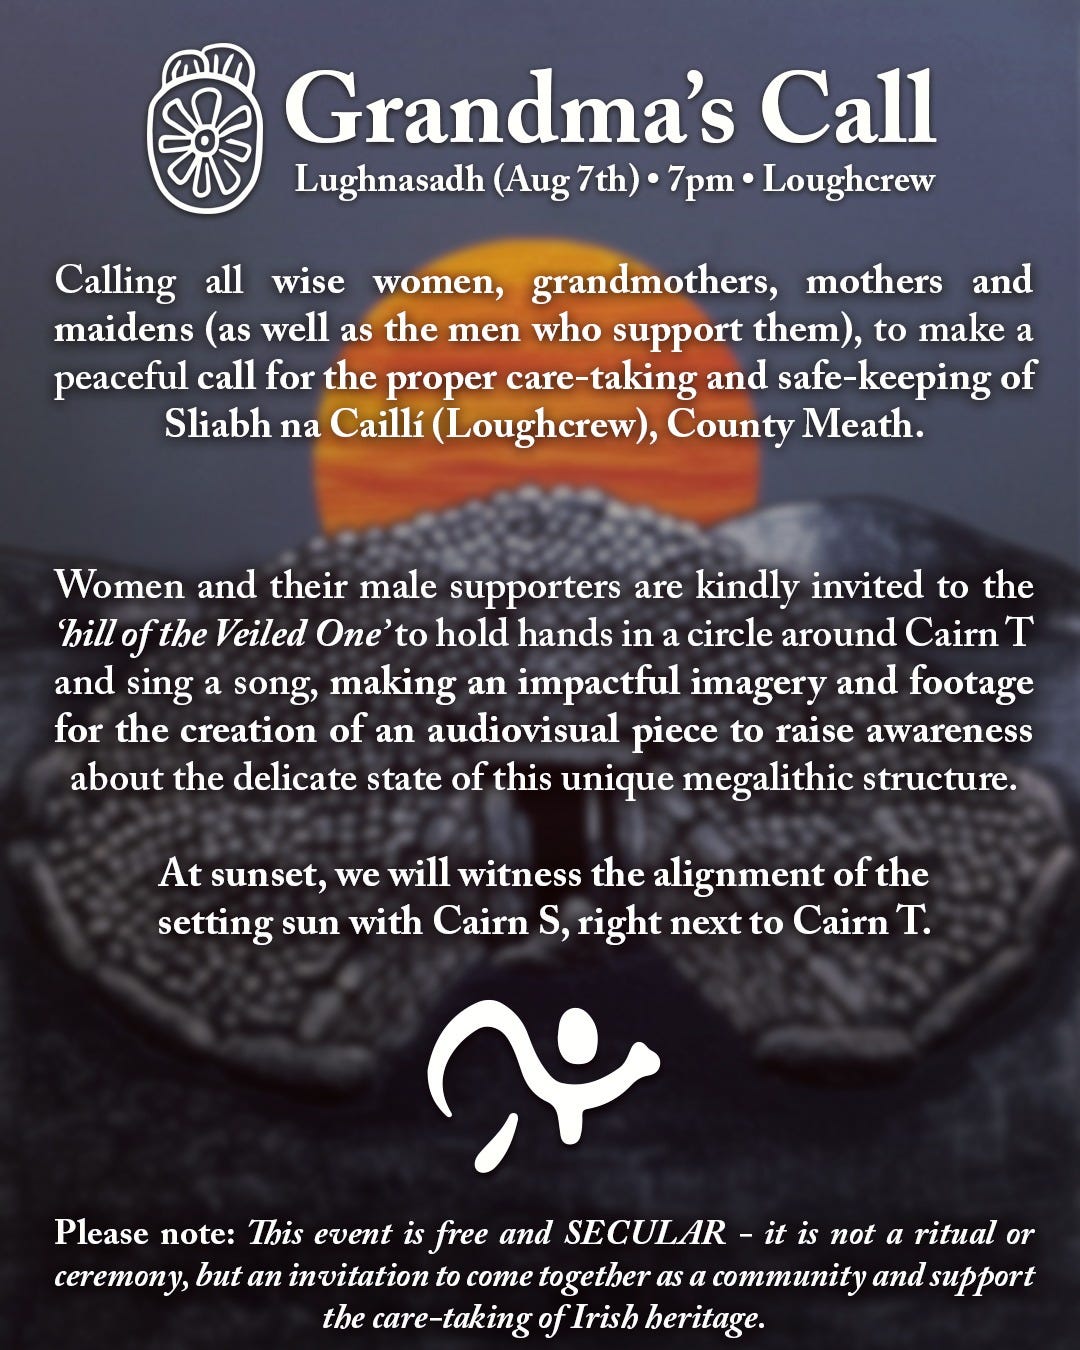 Poster for Grandma;s Call, Lughnasadh, Loughcrew, 7pm 7th August 2023. "Calling all wise women, grandmothers, mothers and maidens as well as the men who support them, to make a peaceful call for the proper care-taking and safe-keeping of Sliabh na Caillí, Loughcrew, County Meath".